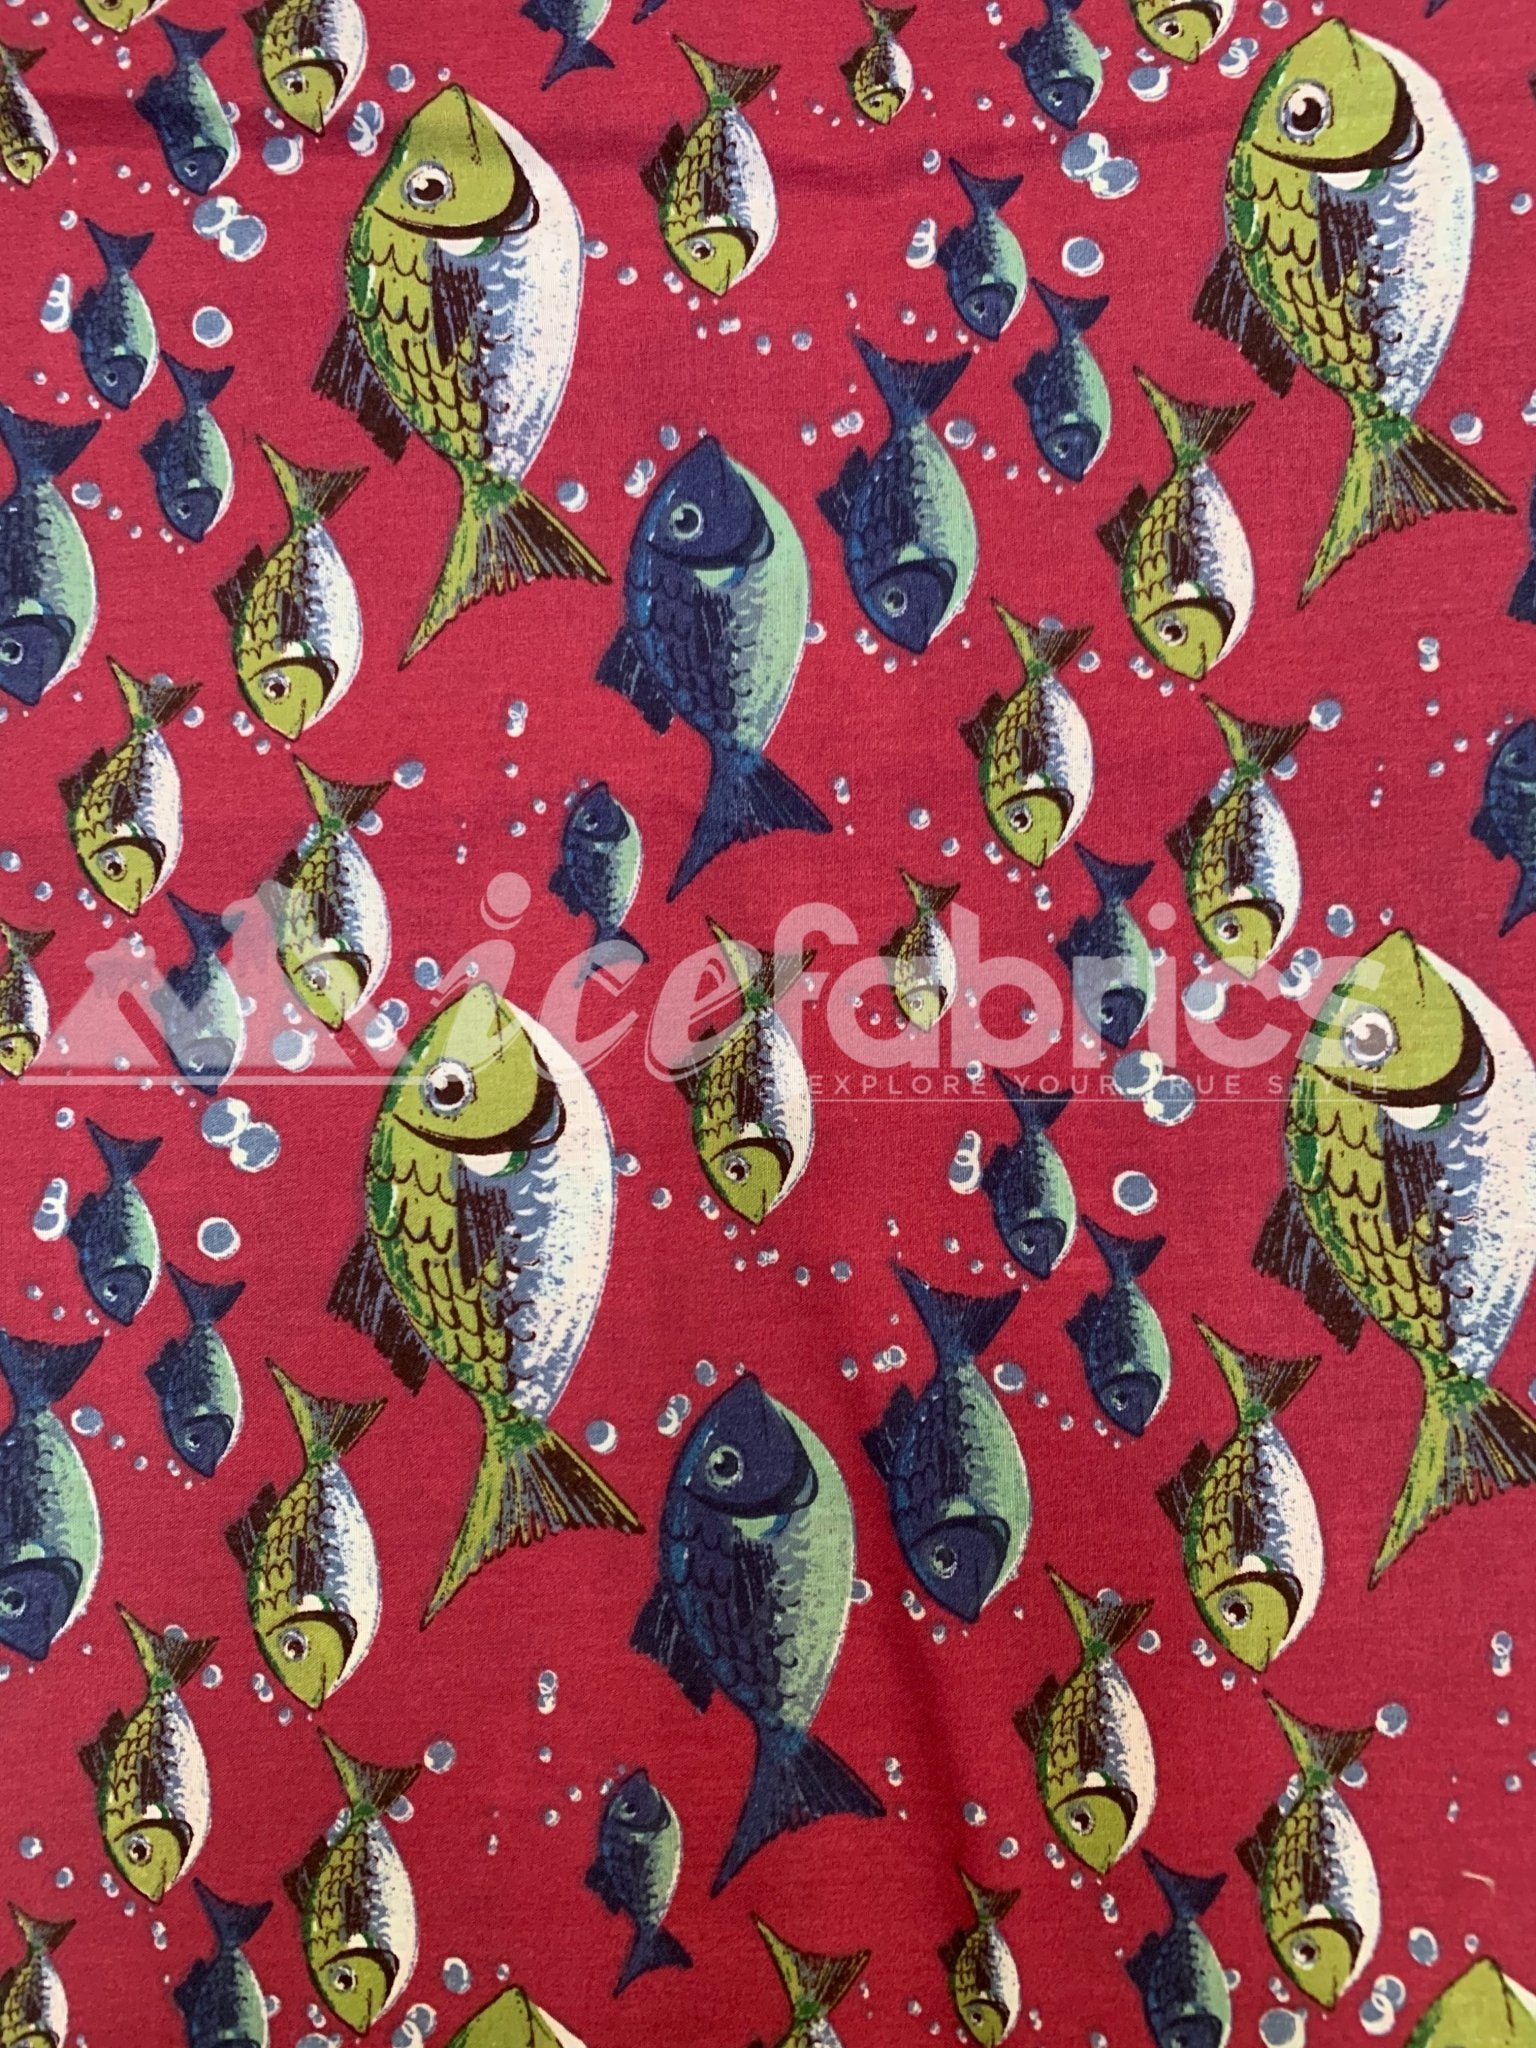 Fashion Fish Print Poly Cotton Fabric By The Yard (Red, Gray, Blue)